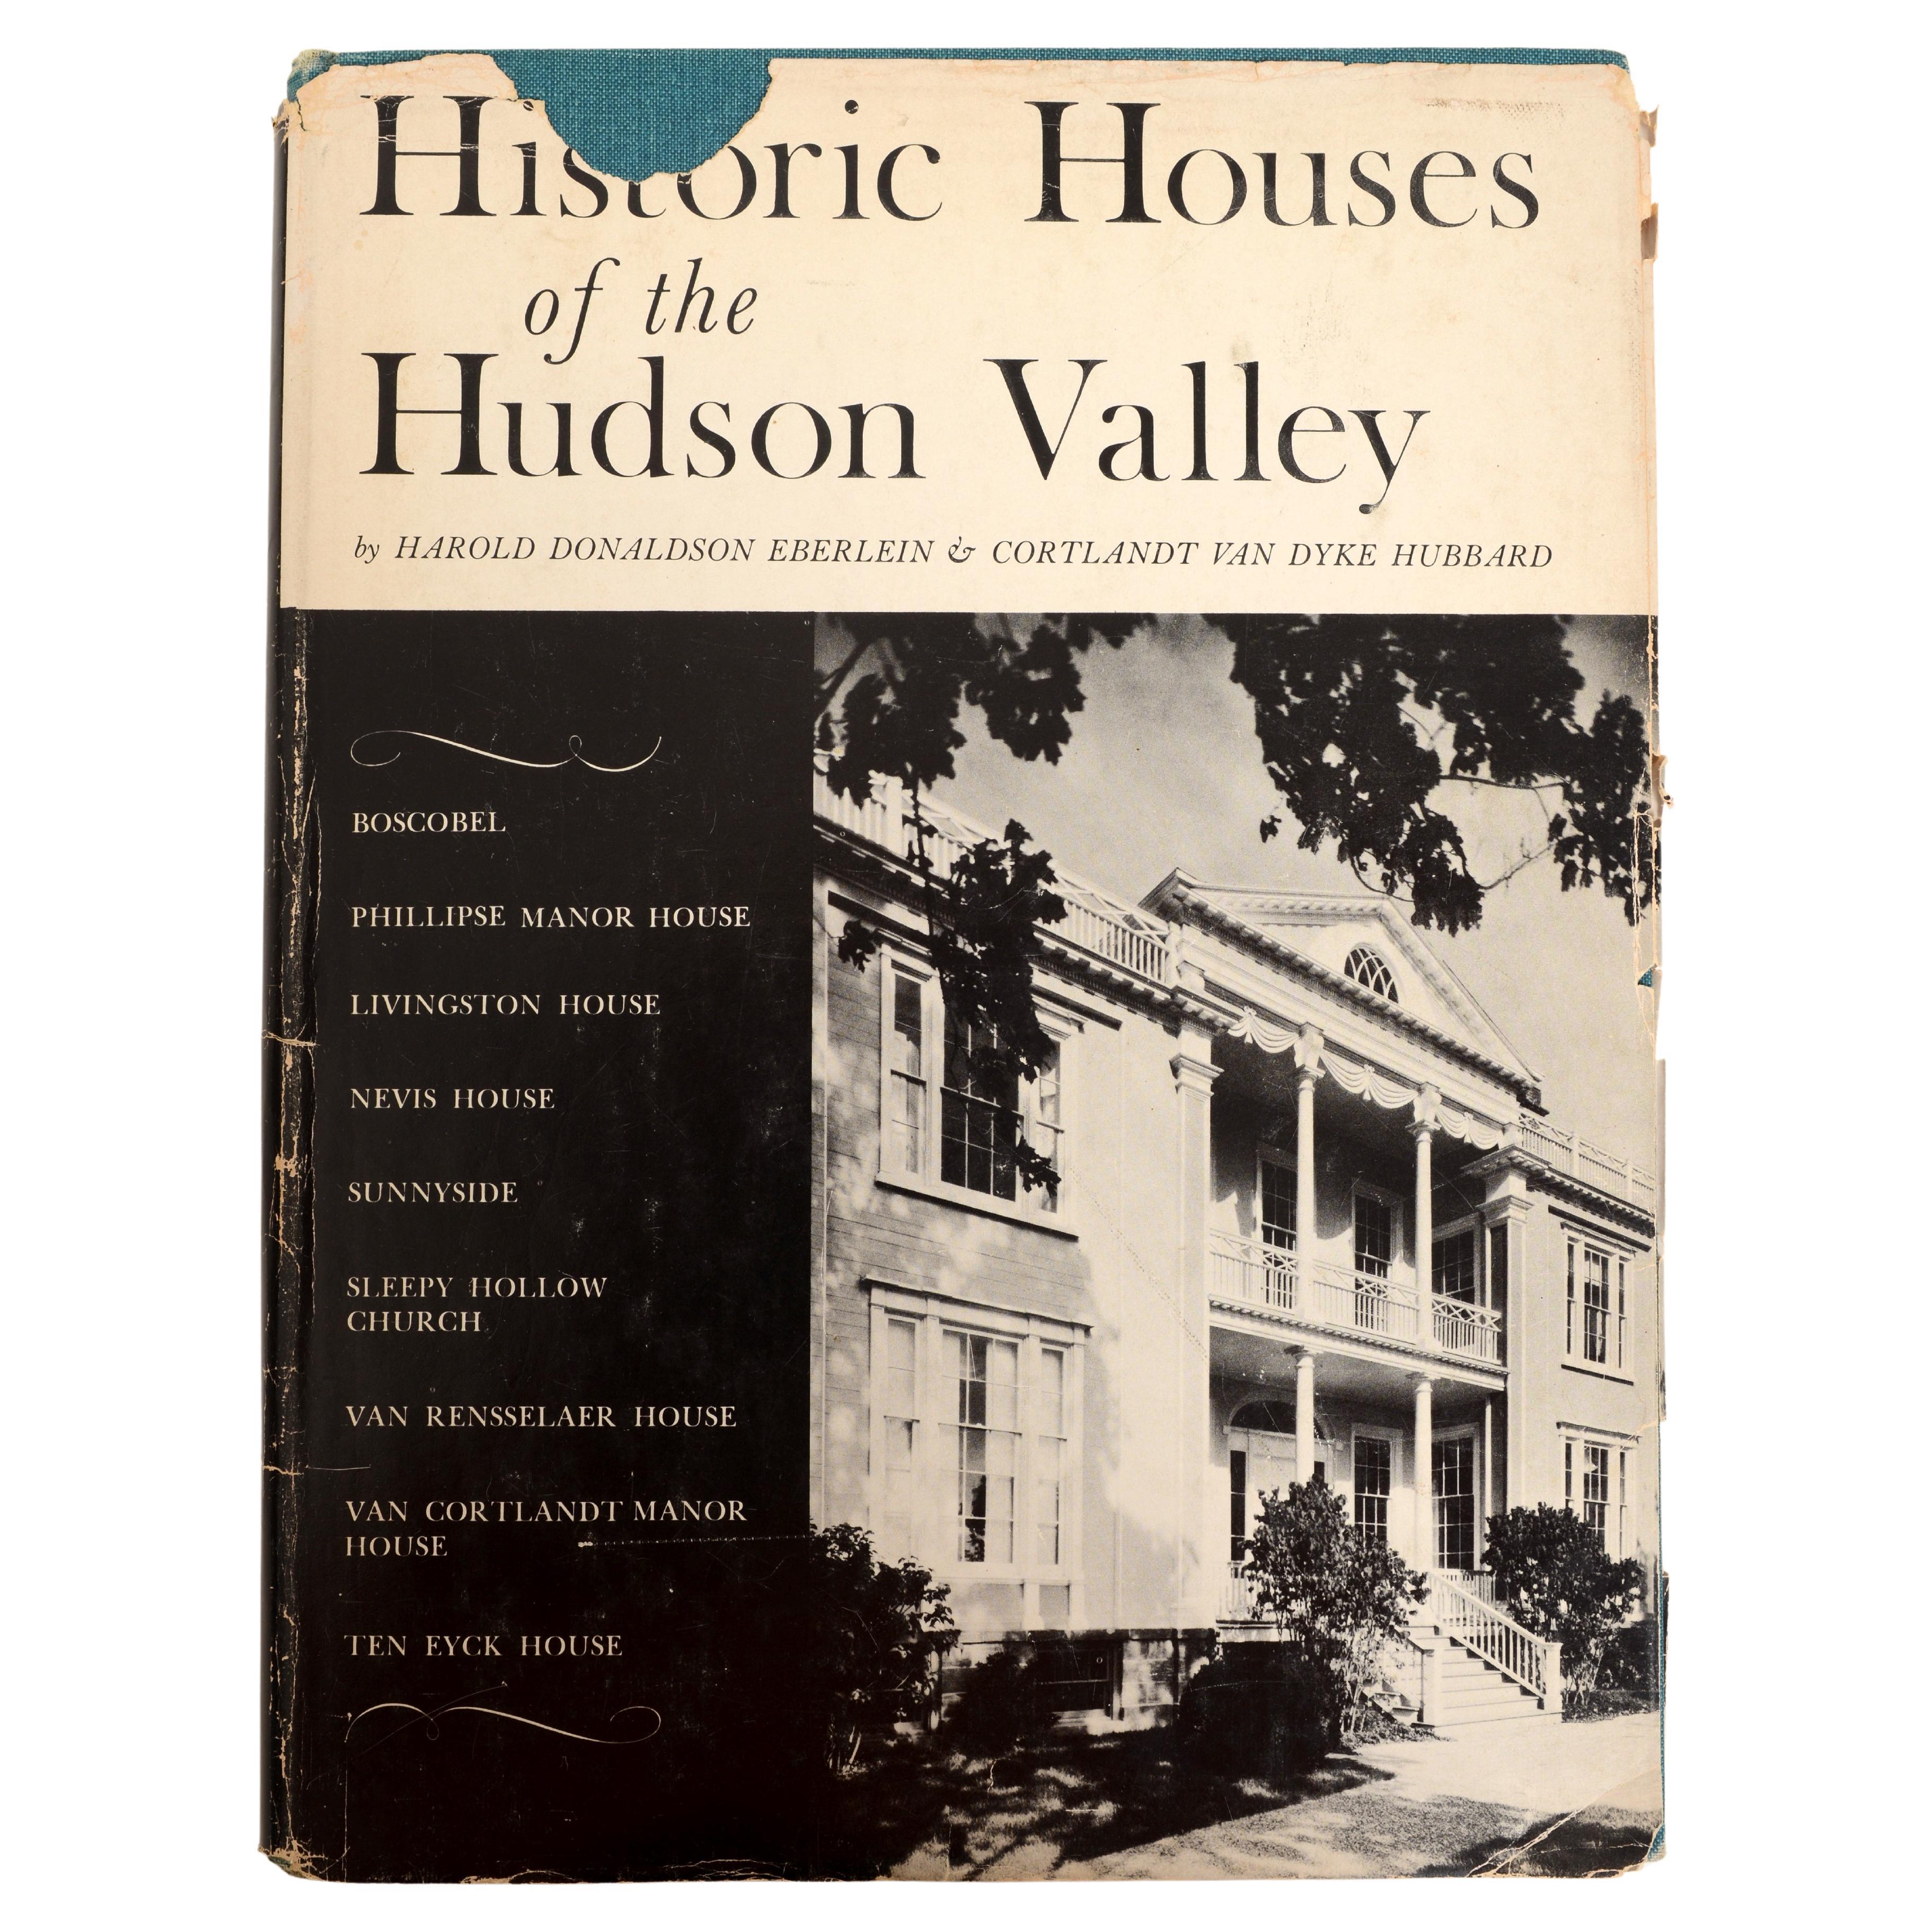 Historic Houses of the Hudson Valley by Harold Donaldson Eberlein